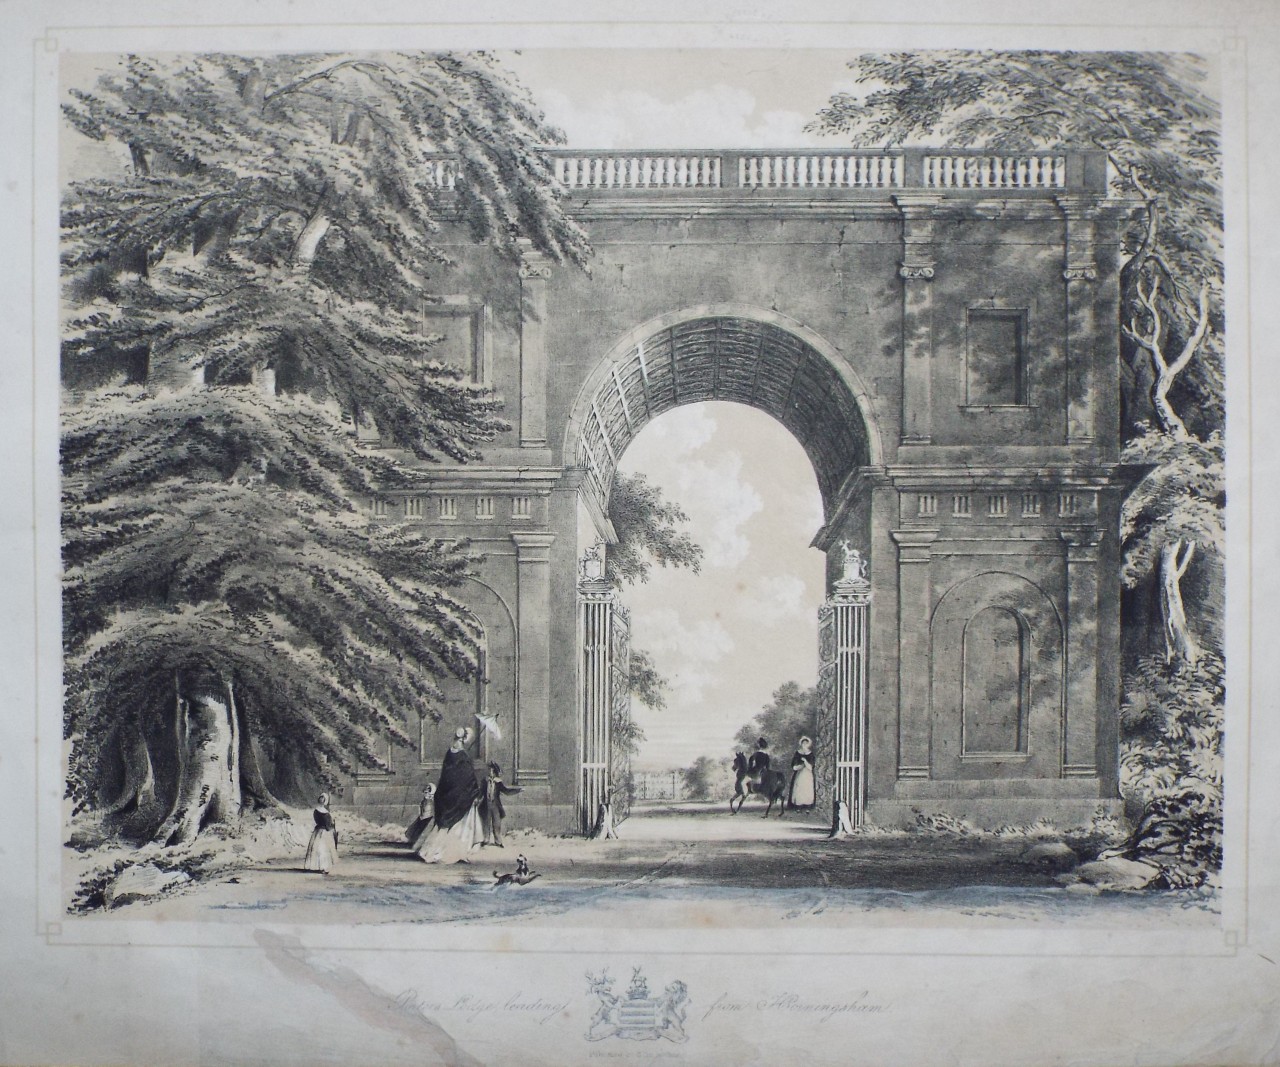 Lithograph - Porter's Lodge, leading from Horningsham. - Pocock